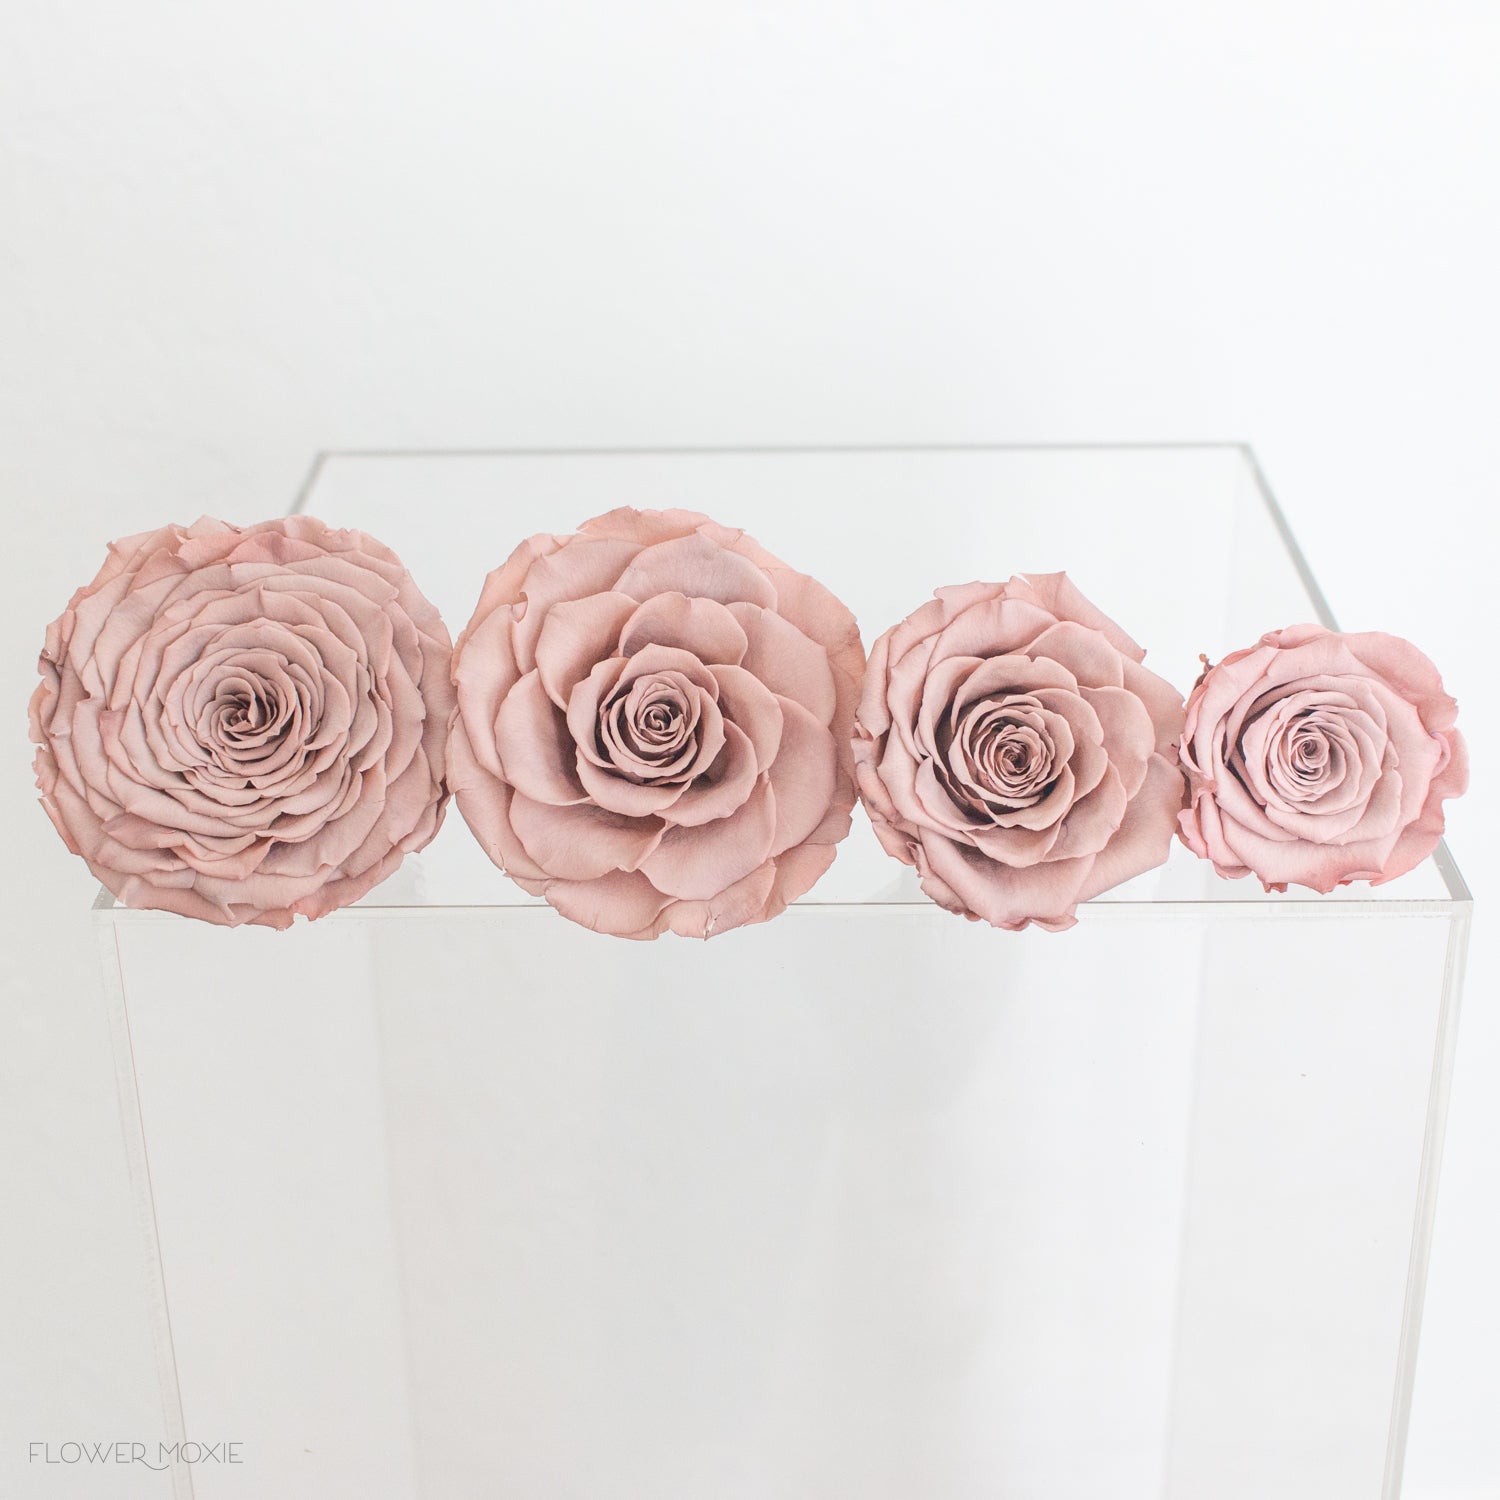 preserved roses by flower moxie supply